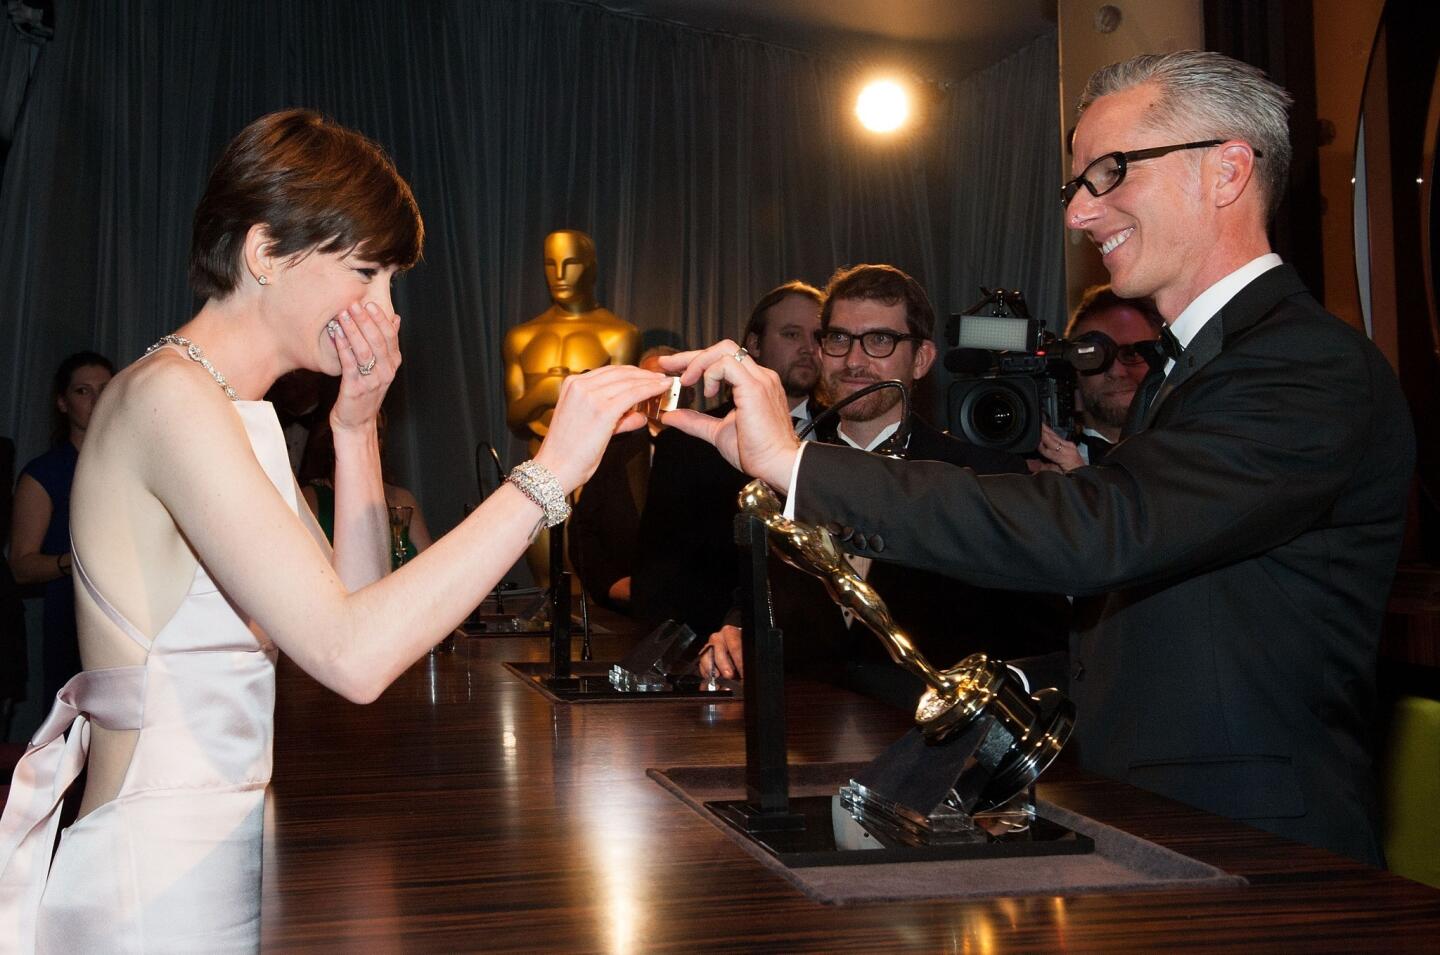 Supporting actress winner Anne Hathaway gets emotional while looking at her name on the engraved plate of her Oscar statue.